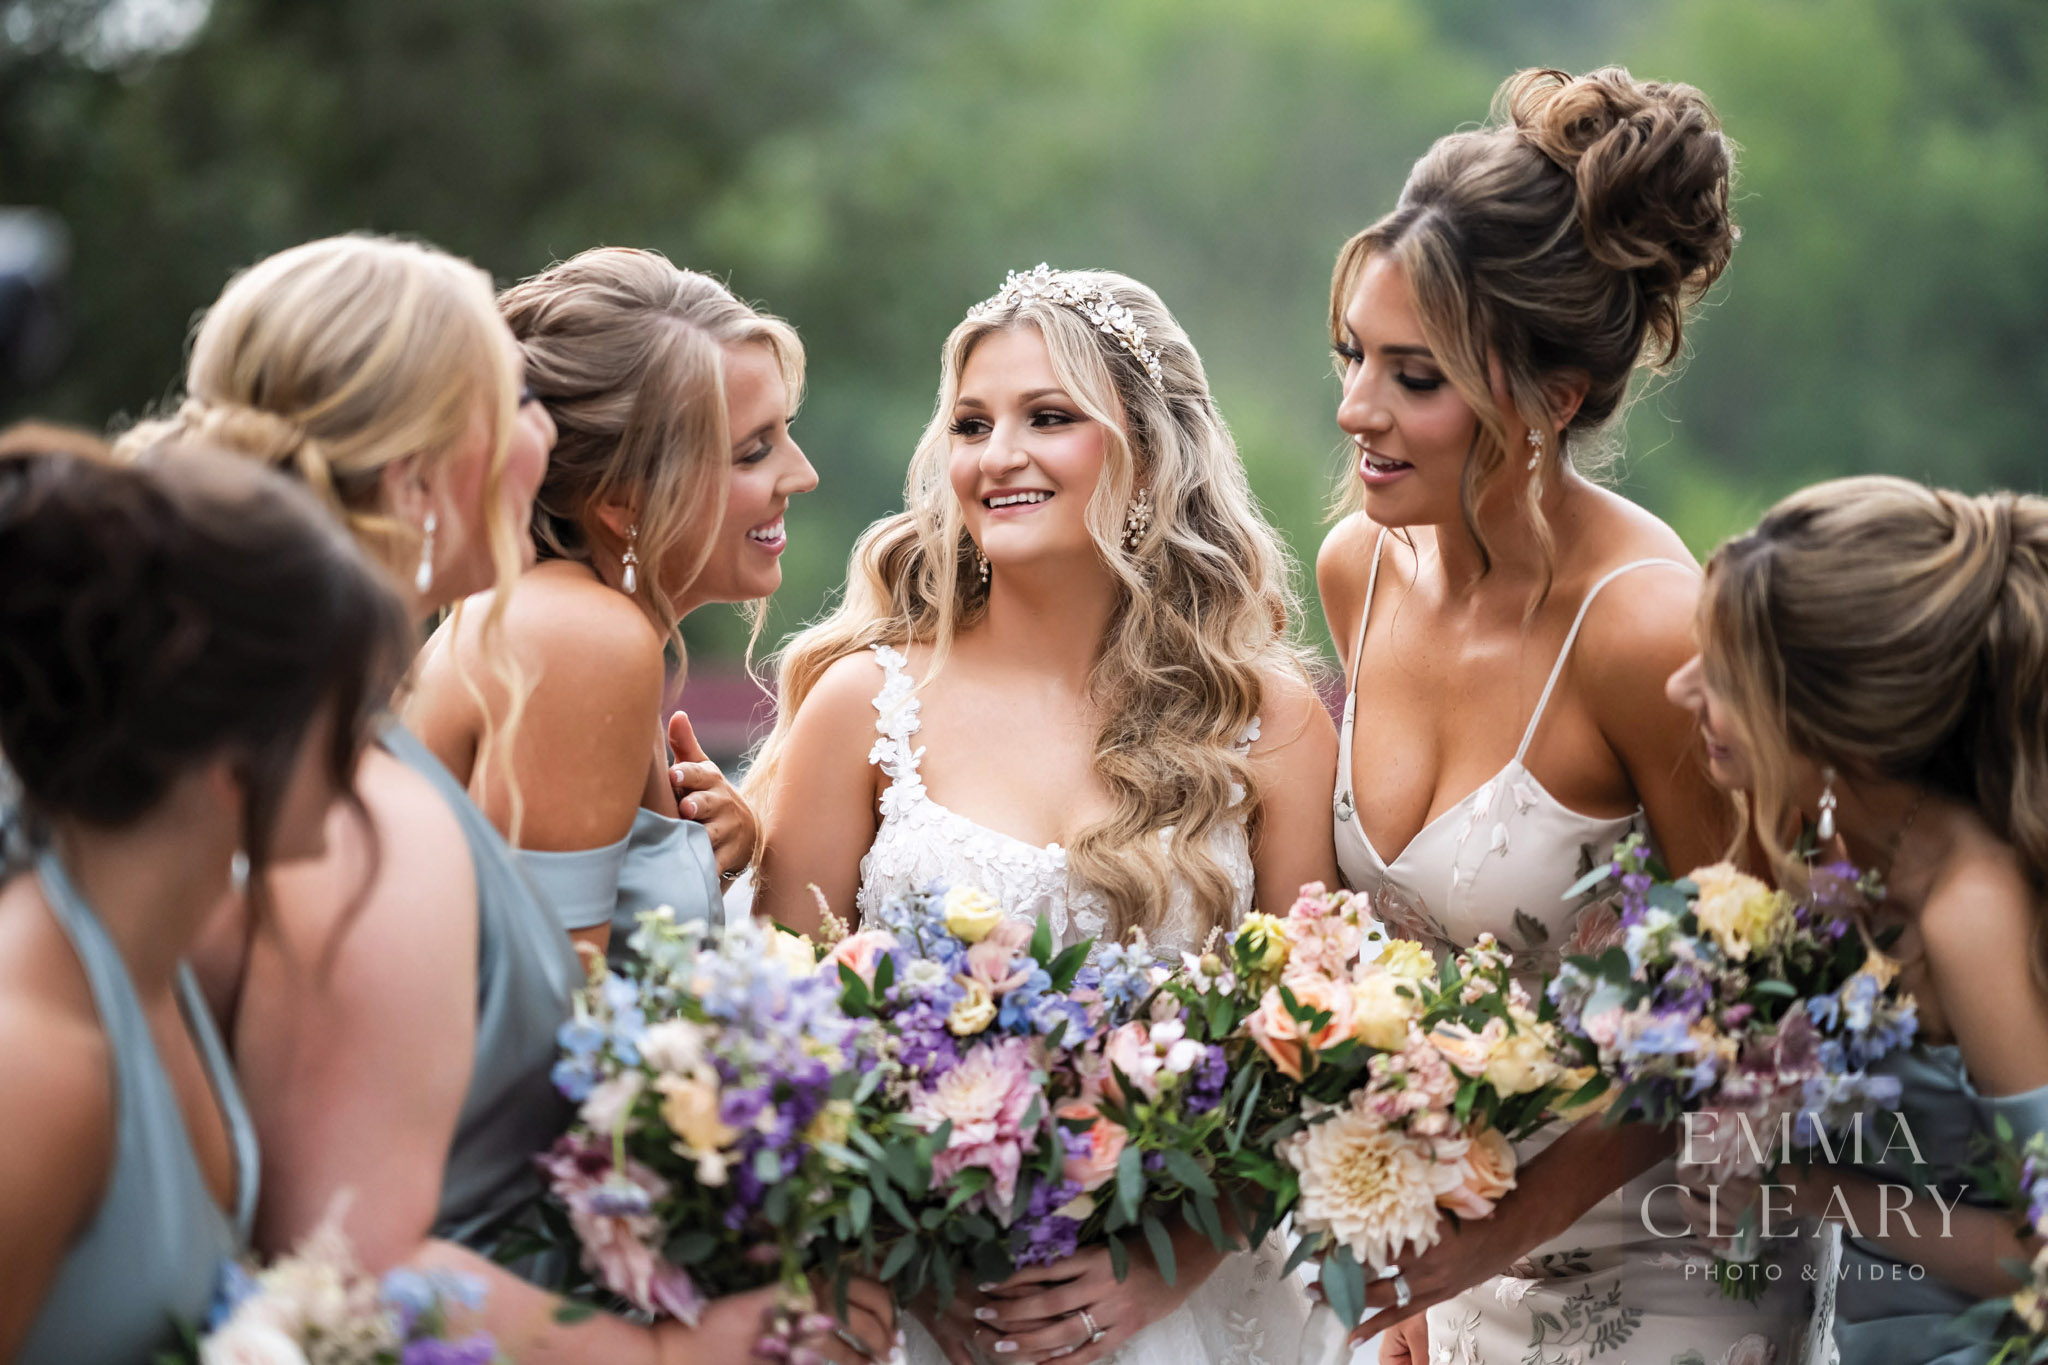 Portrait of the bride and bridesmaids